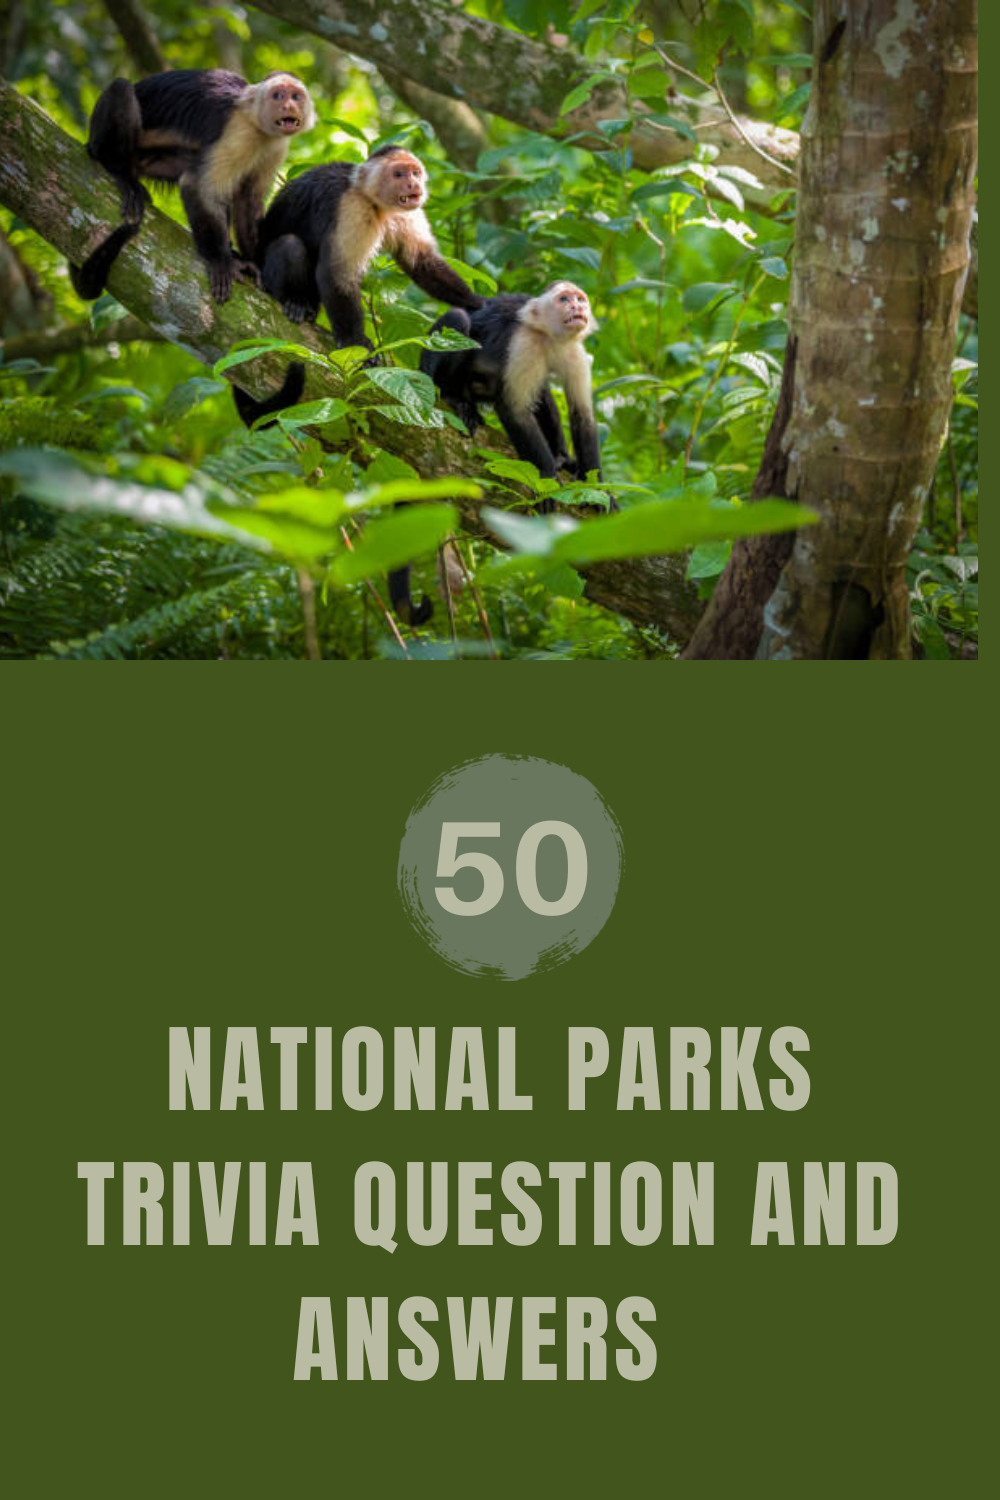 50 National Parks Trivia Question and Answers 